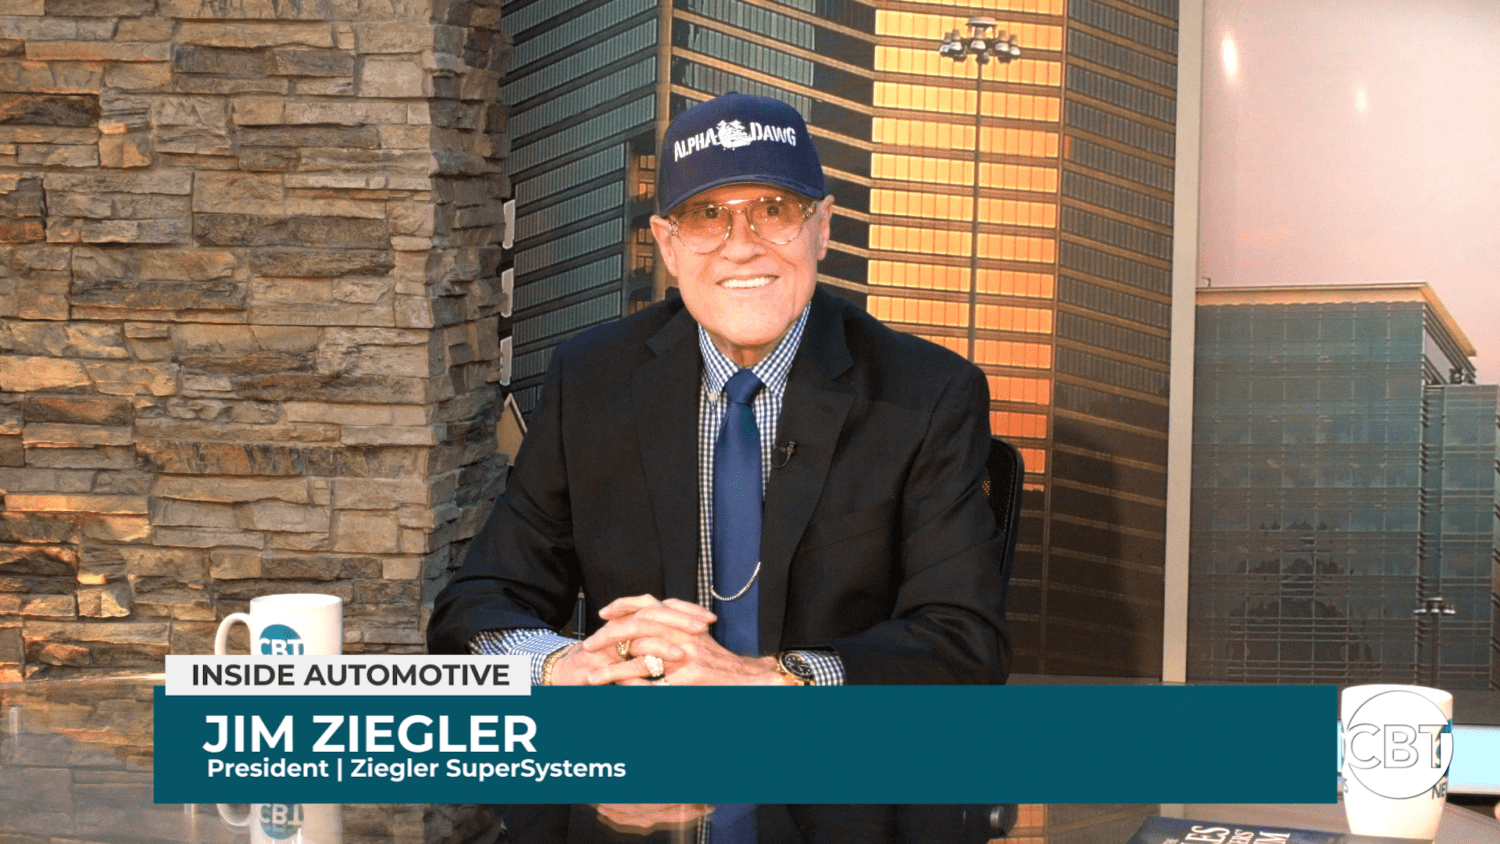 Jim Ziegler joins Inside Automotive to discuss Hyundai's new partnership with Amazon and what it means for the retail automotive sector.